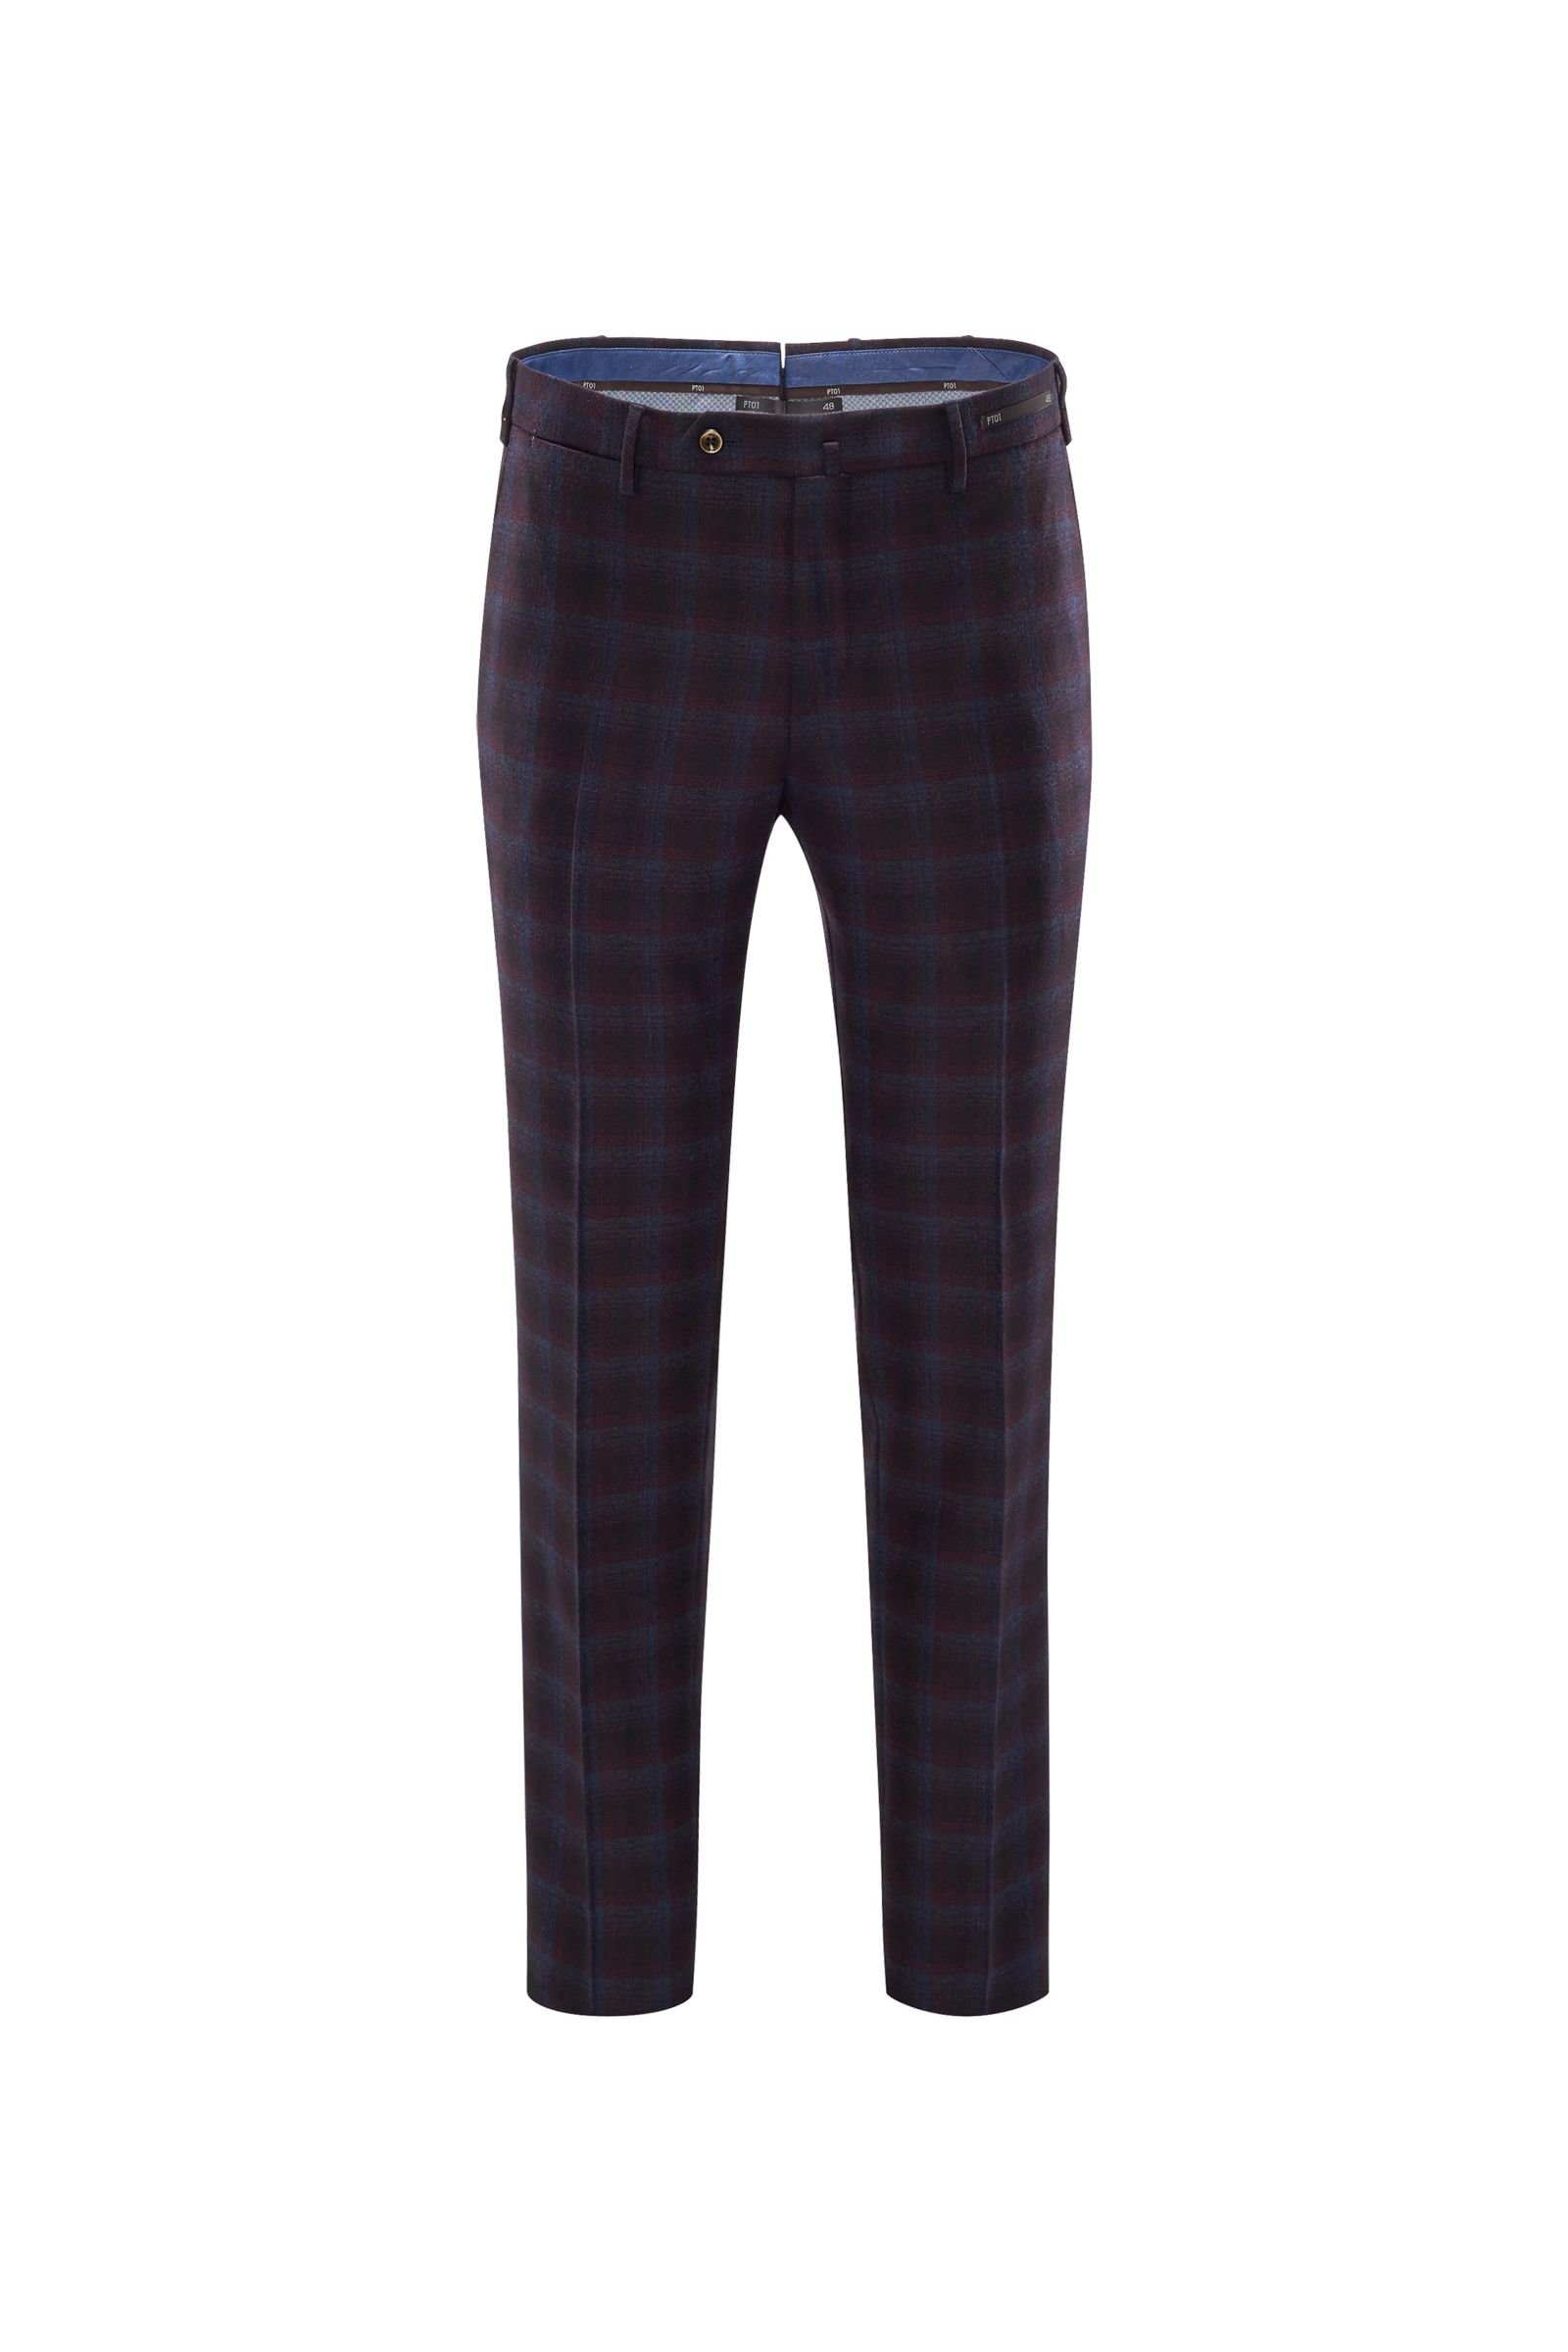 Wool trousers 'Slim Fit' burgundy/navy checked